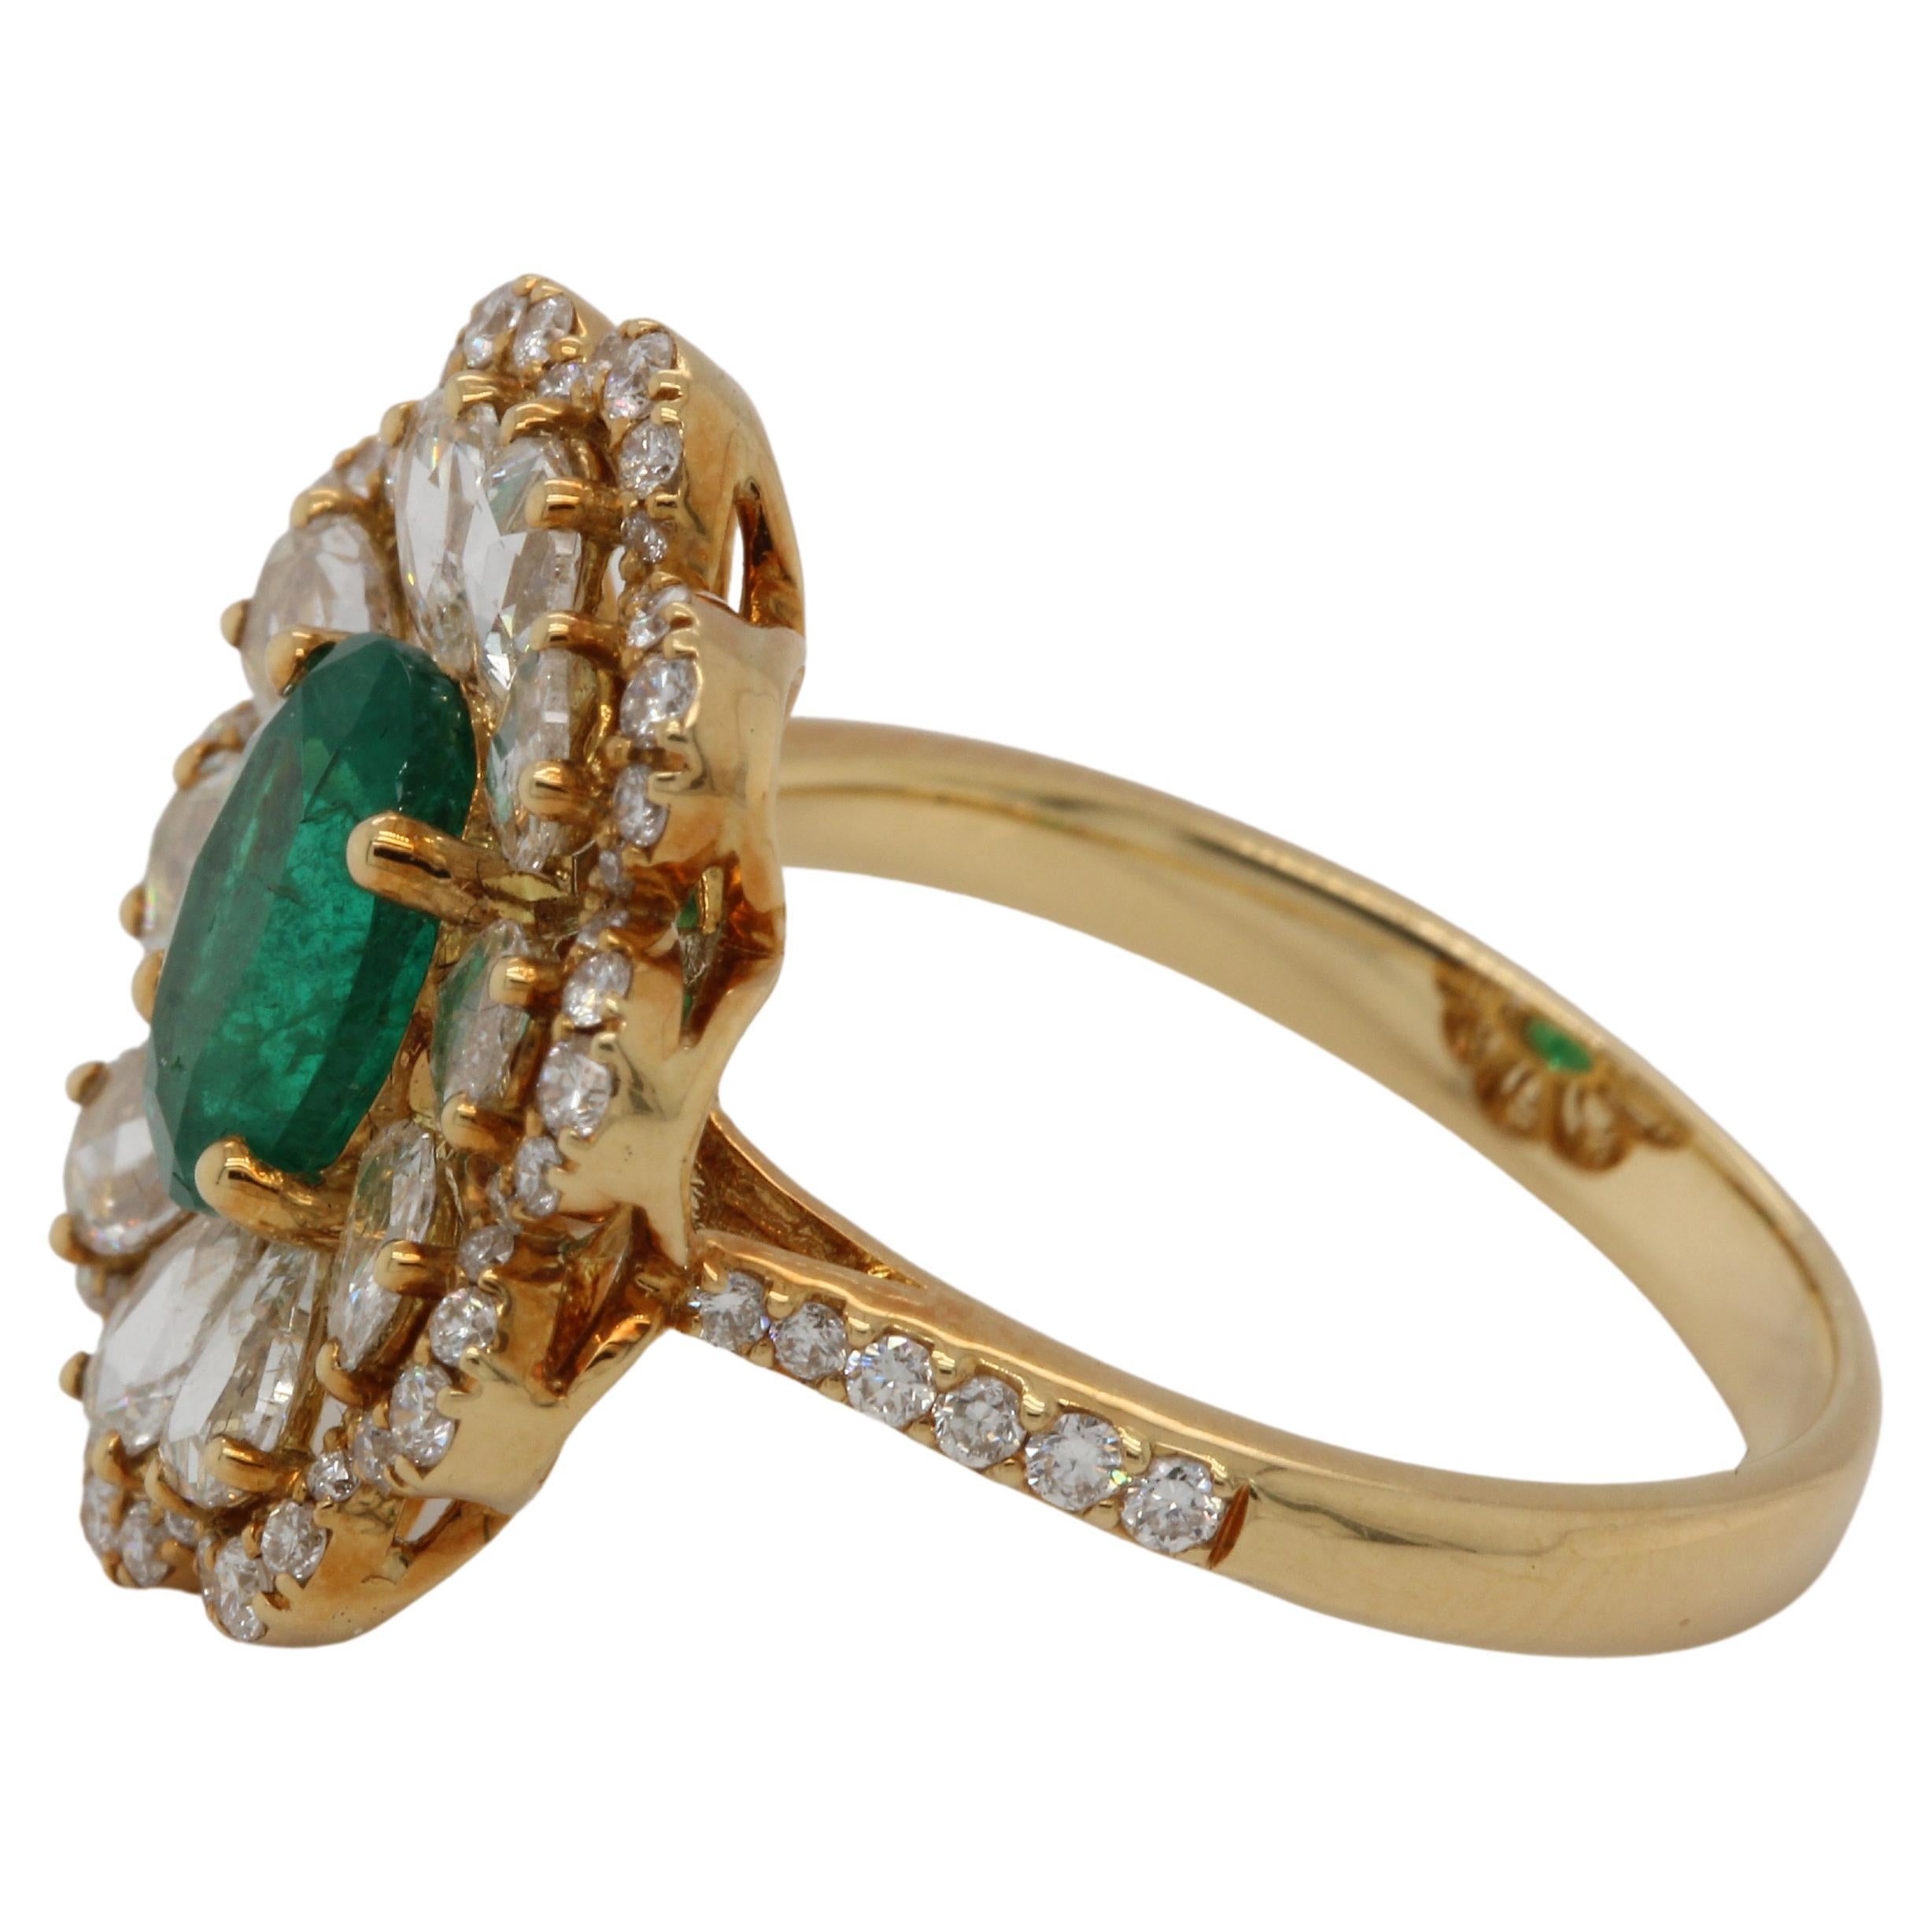 1.38 Carat Emerald and Diamond Ring in 18 Karat Gold For Sale 1